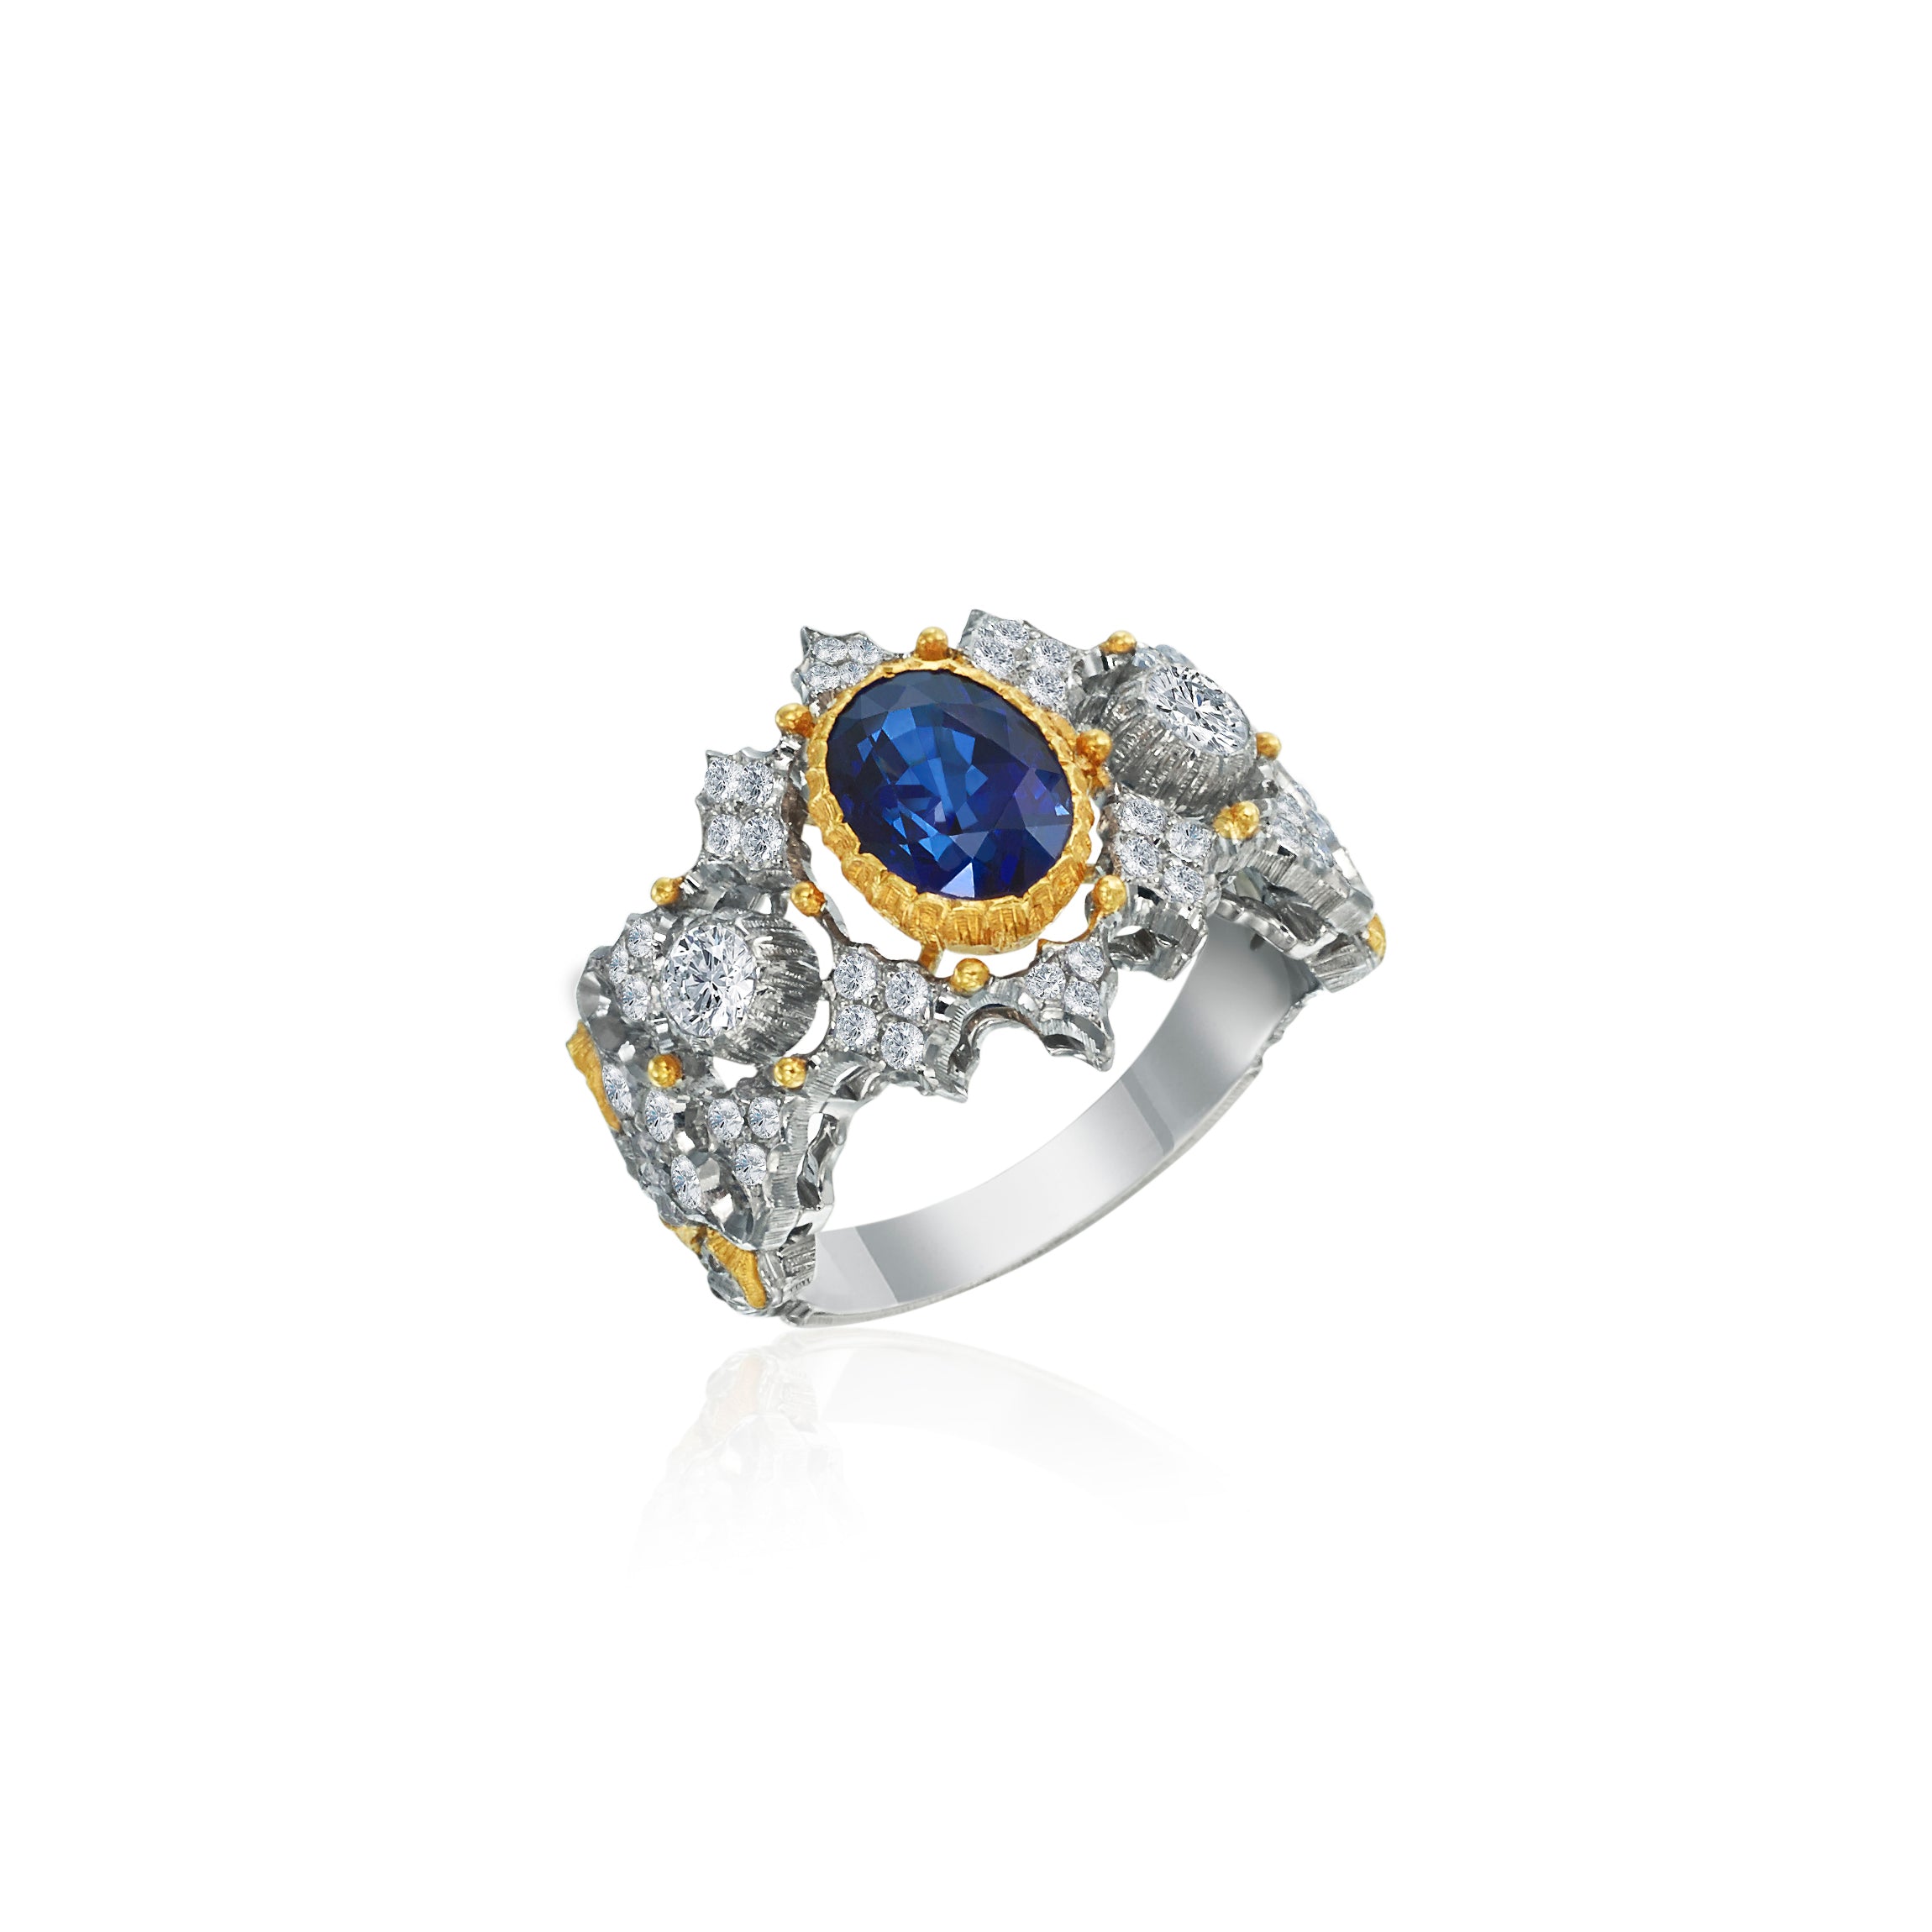 A Buccellati ring in 18K gold and white gold set with a faceted sapphire  and round brilliant-cut diamonds. - Bukowskis